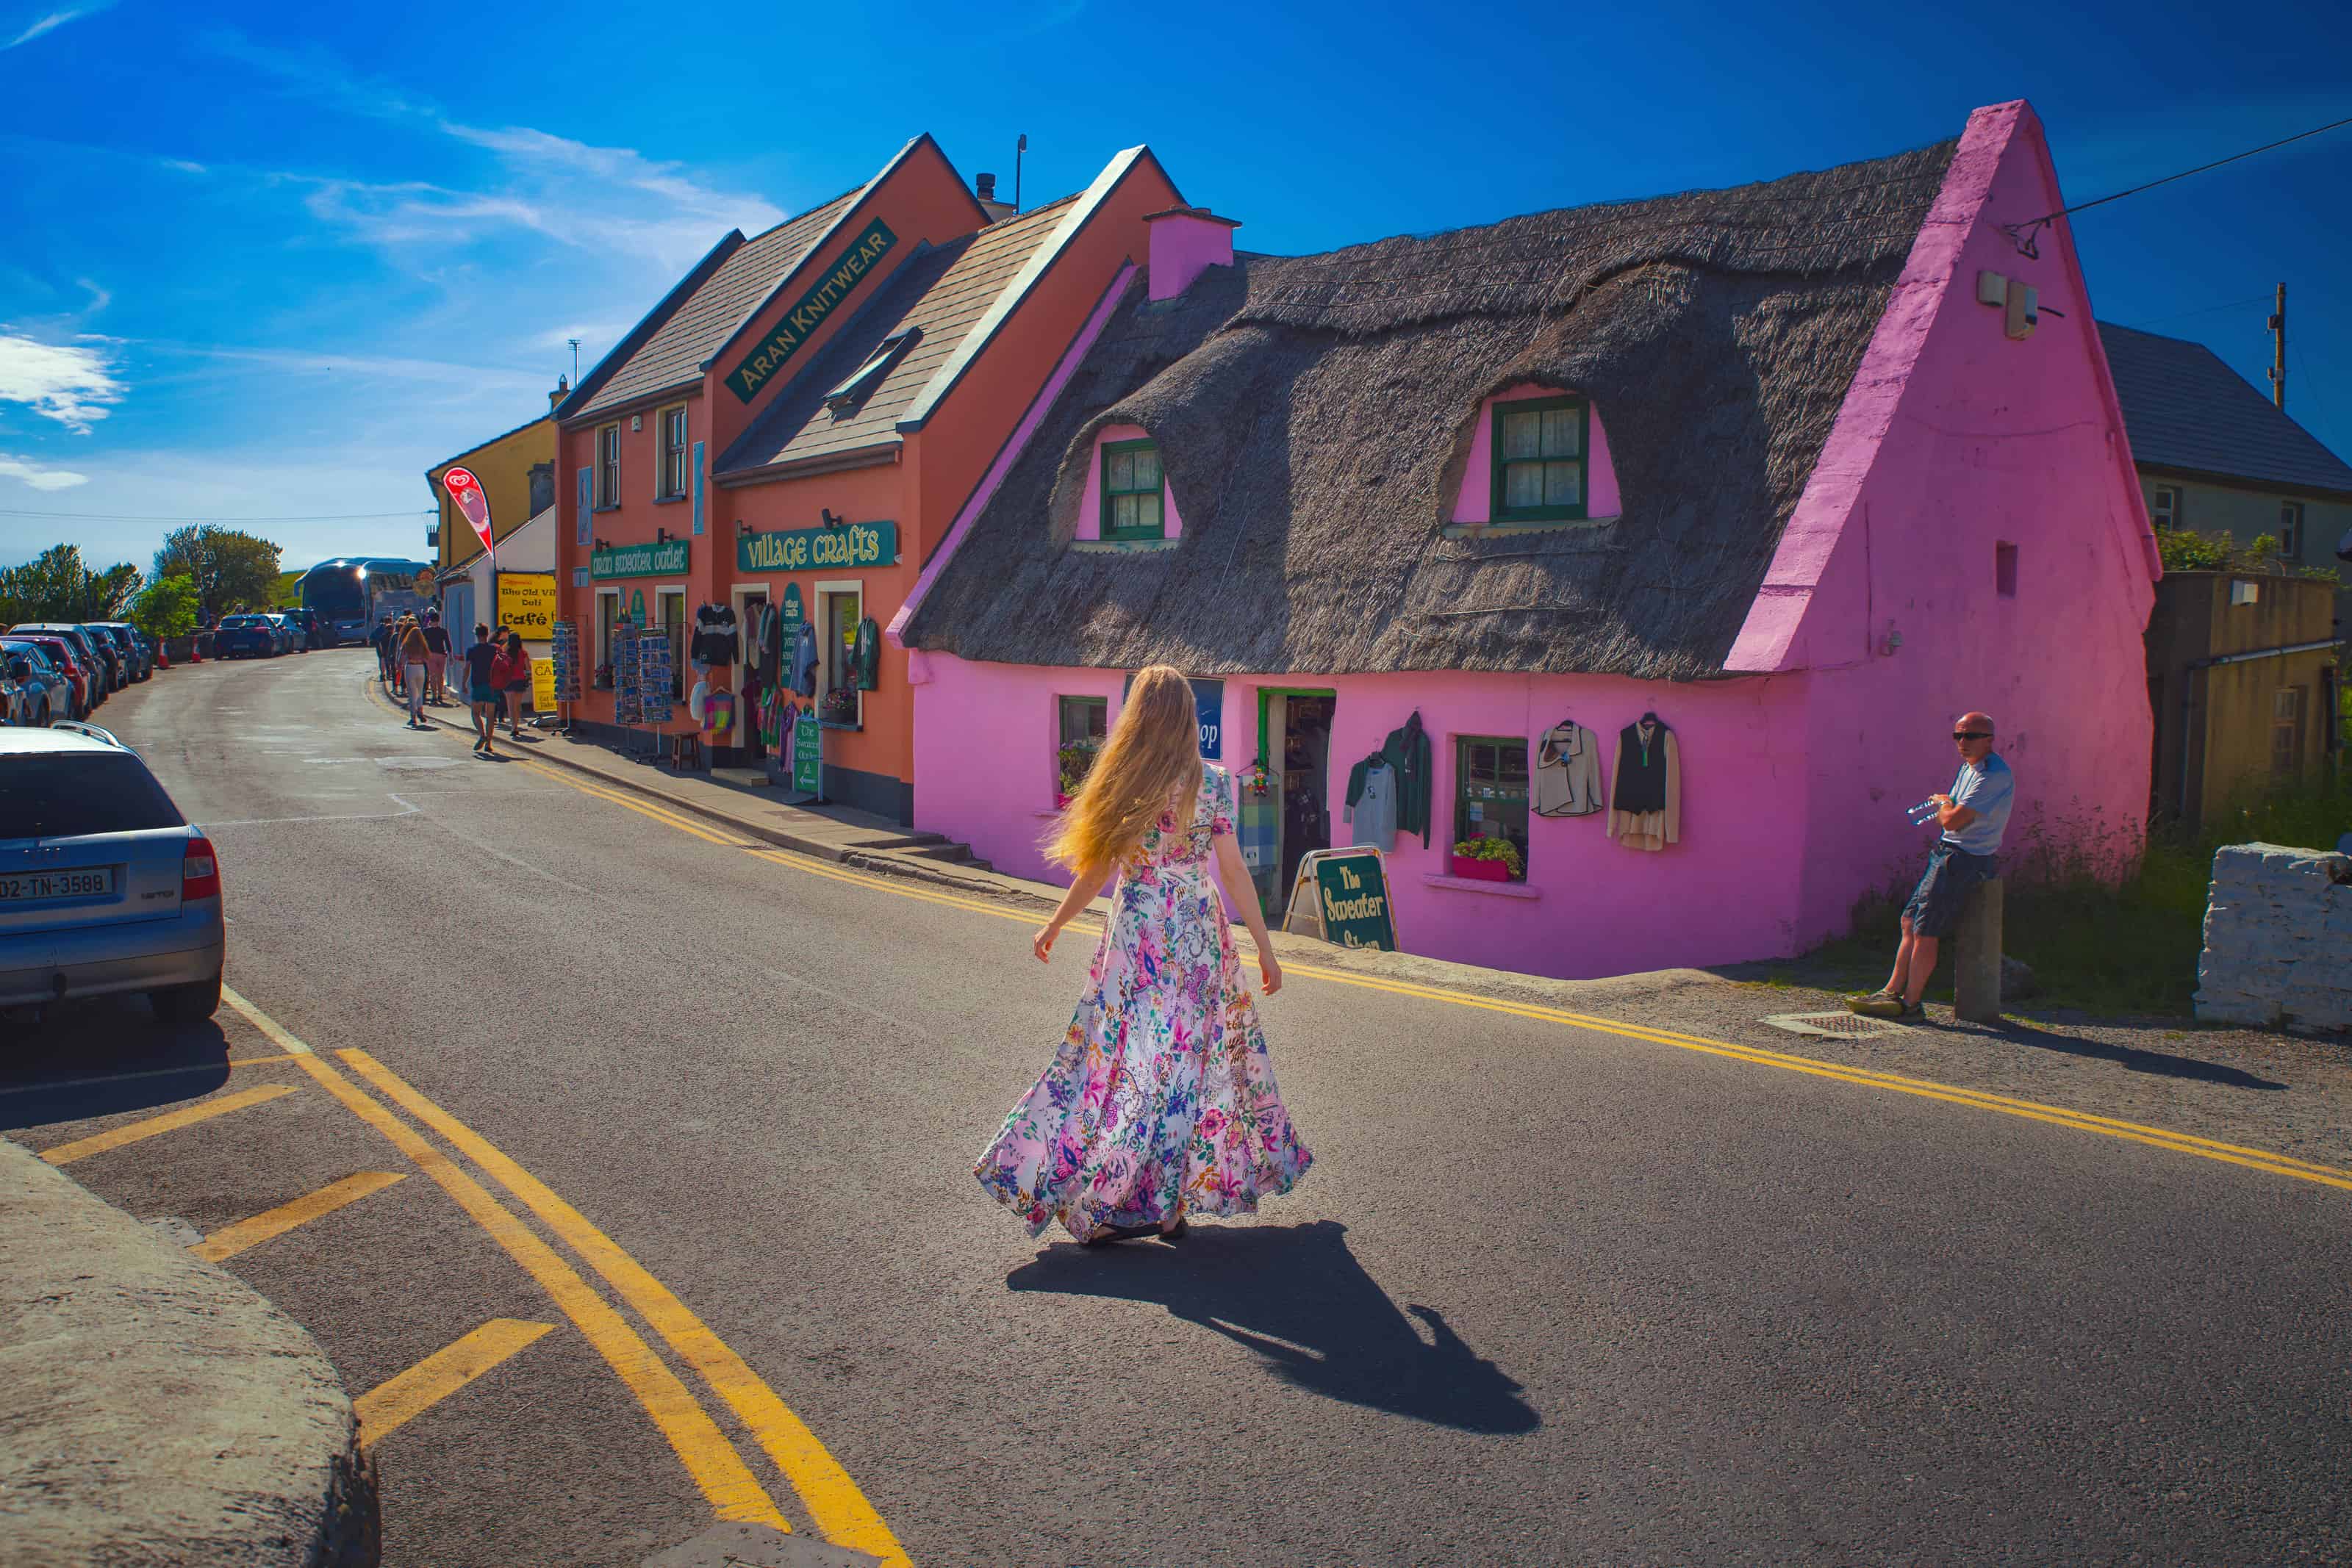 Woman in a flowing floral dress walking down the street in Doolin next to colorful buildings.